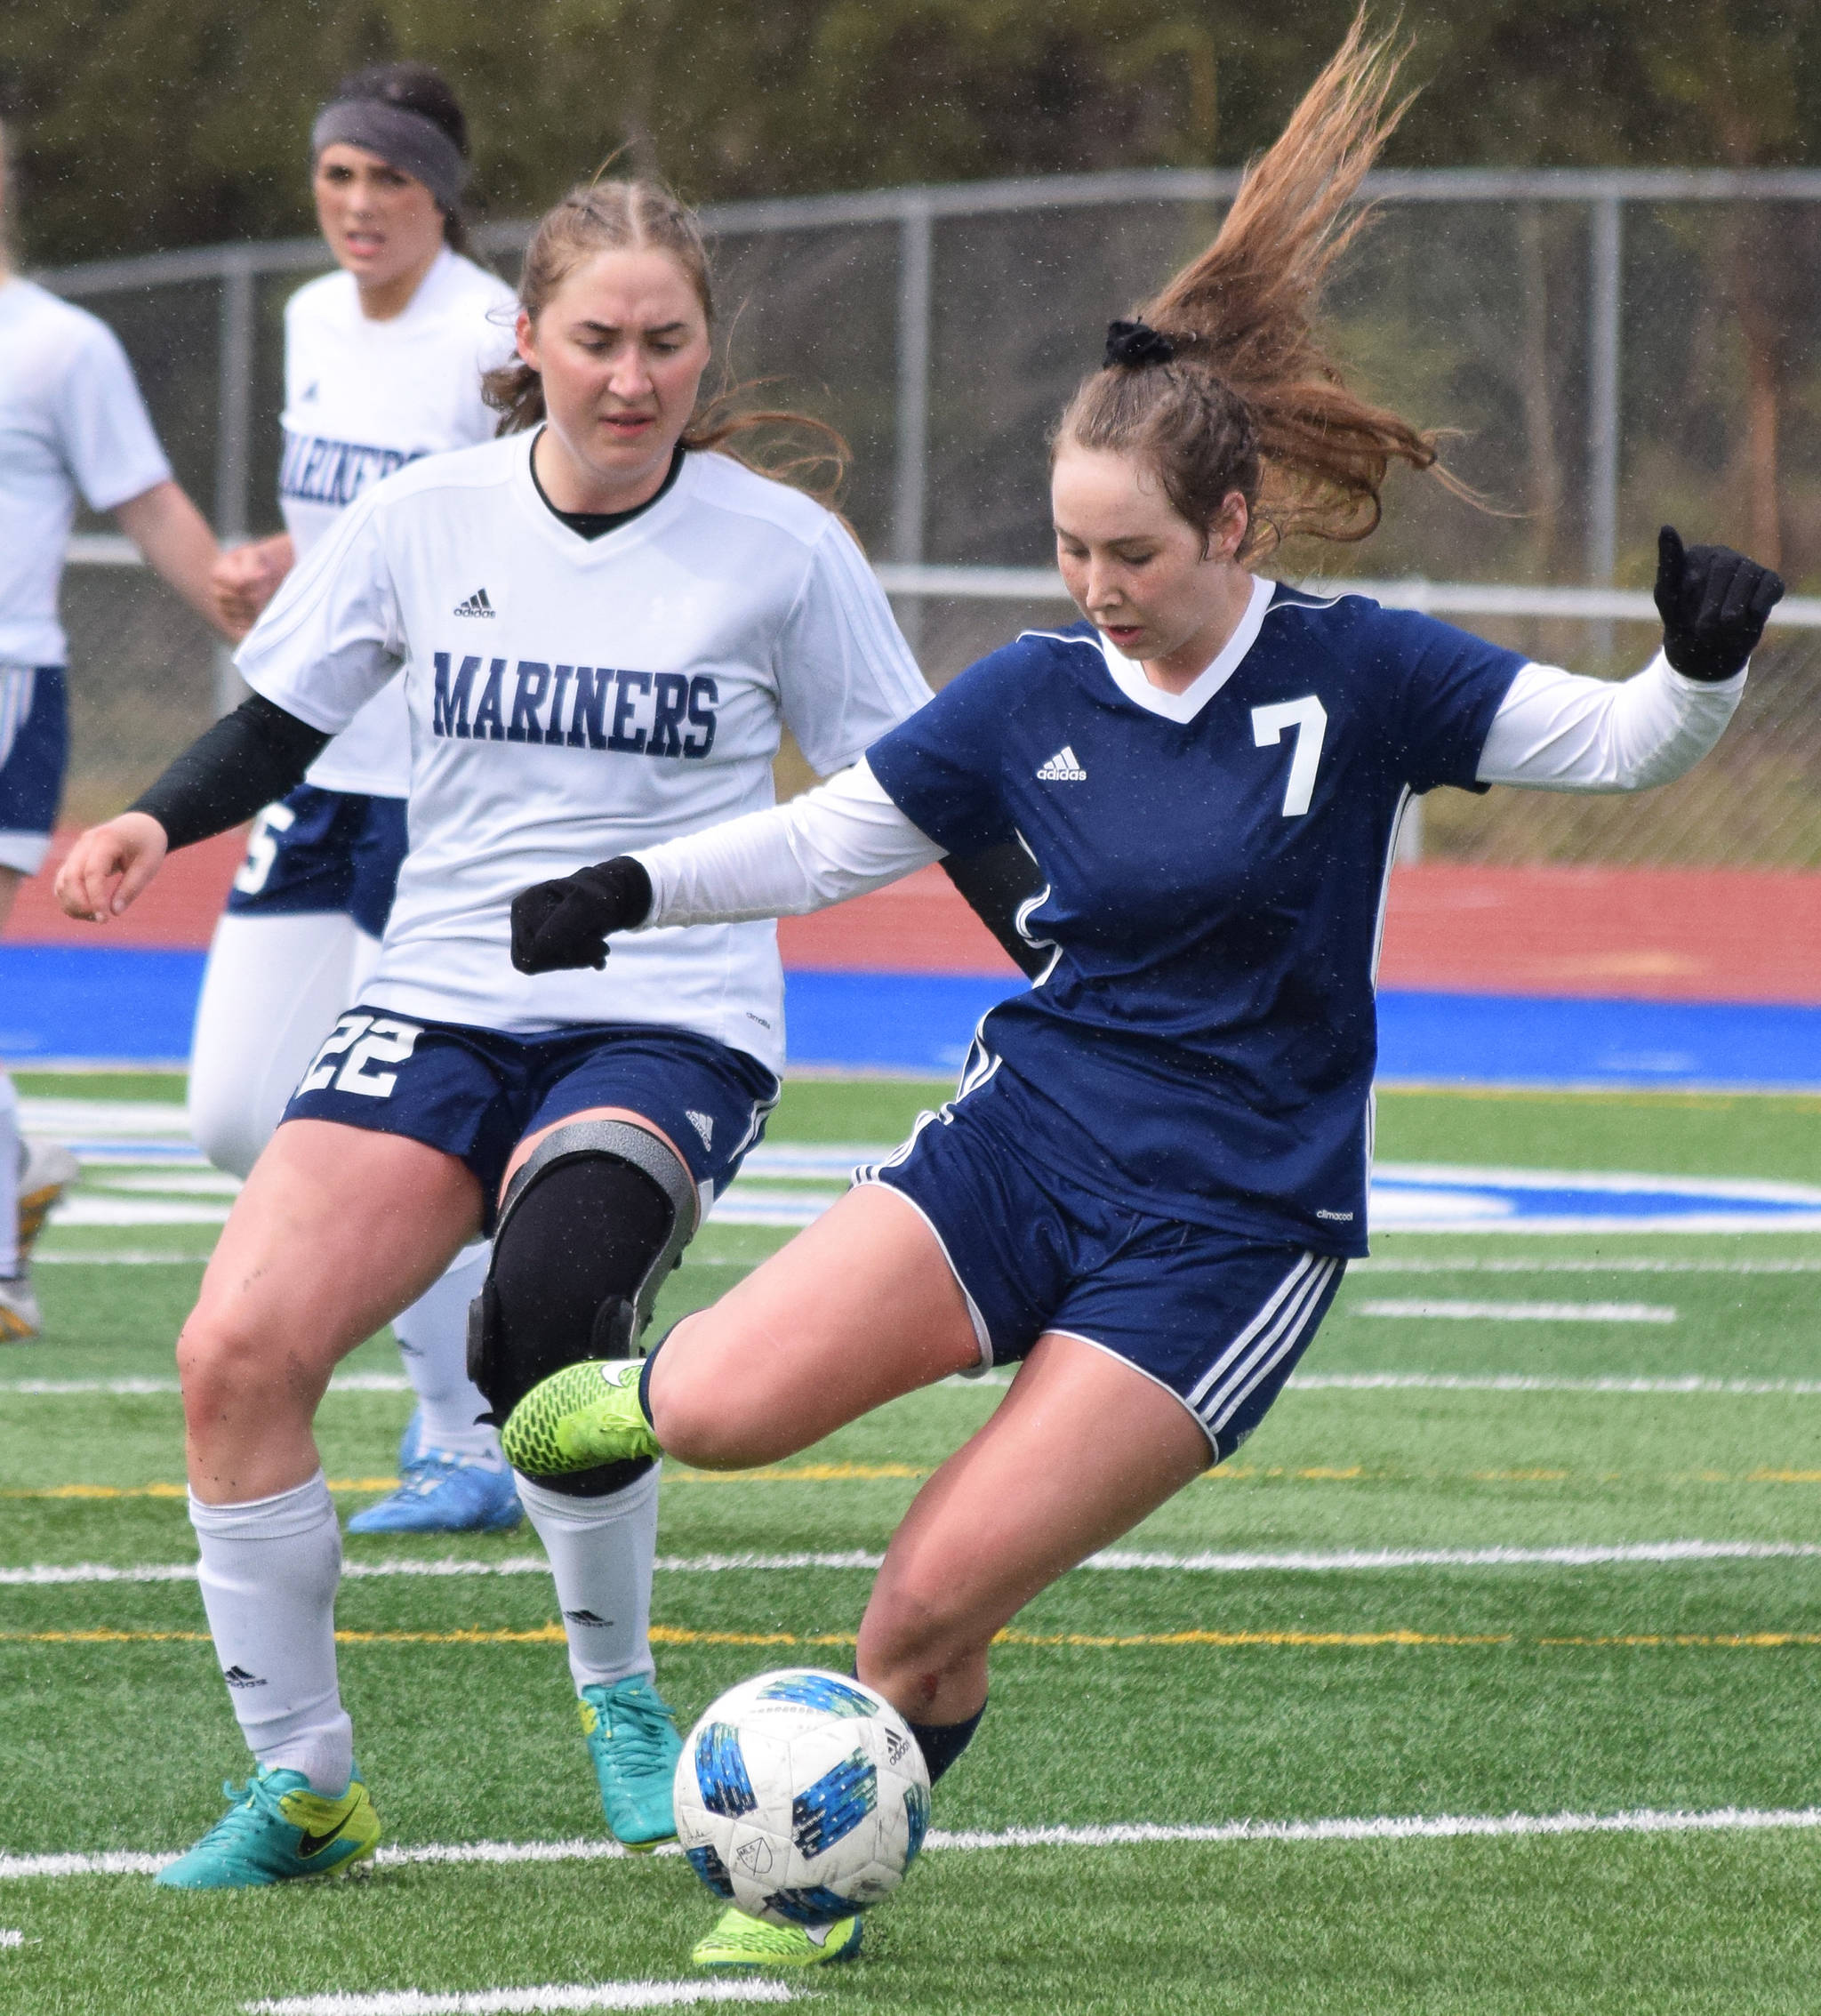 Soldotna’s Journey Miller (7) unleashes a kick in front of Homer’s Brenna McCarron Saturday, May 11, 2019, in a Peninsula Conference game in Soldotna, Alaska. (Photo by Joey Klecka/Peninsula Clarion)